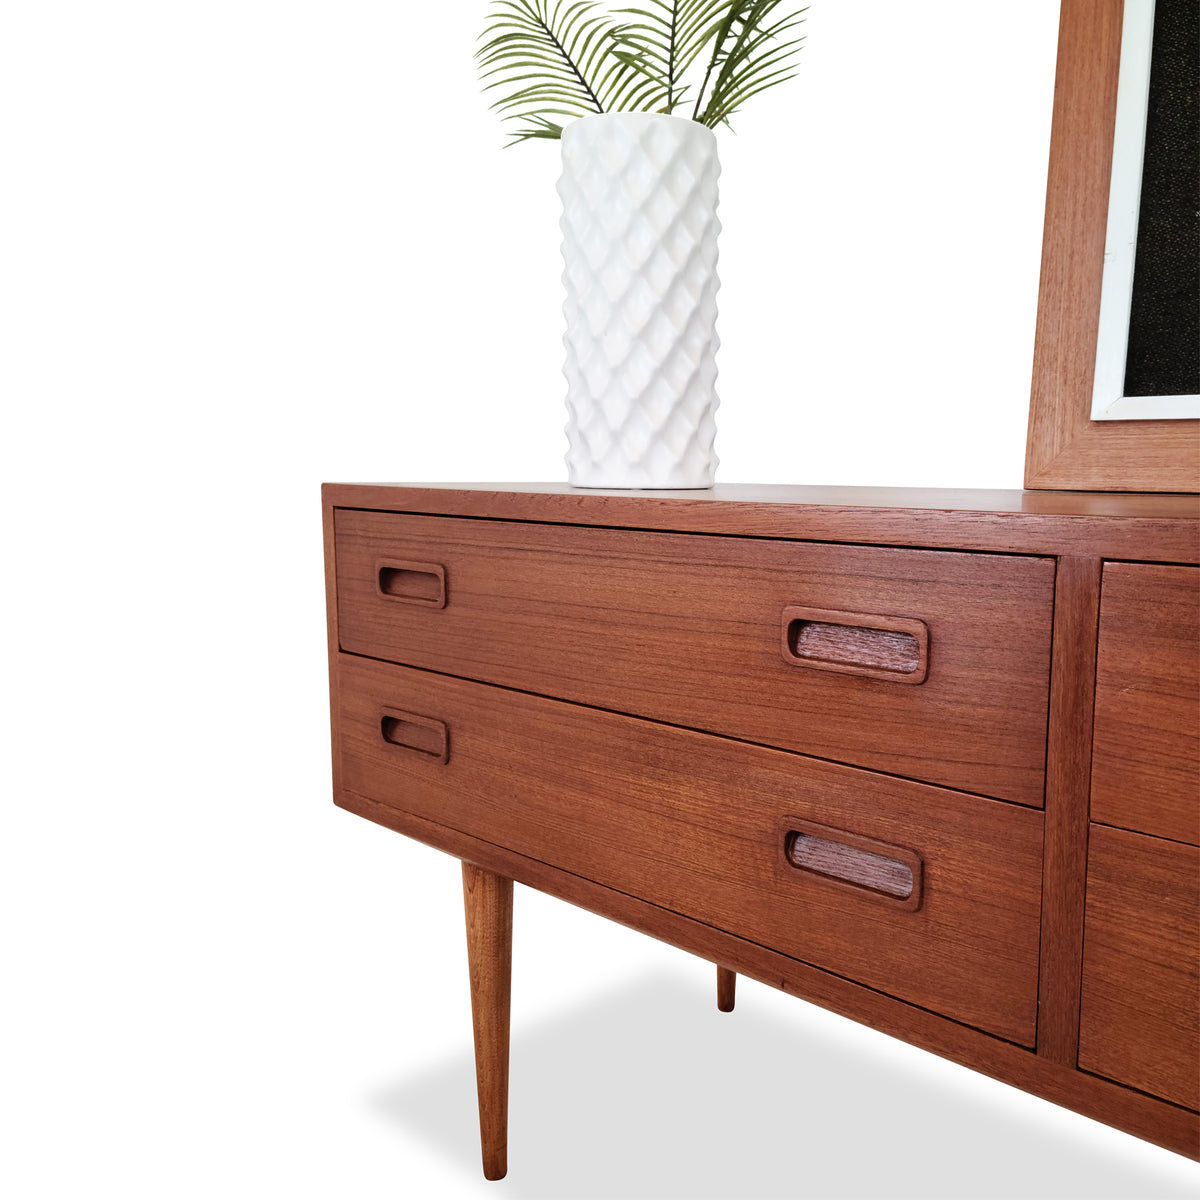 Teak Four Drawer Console by Poul Hundevad